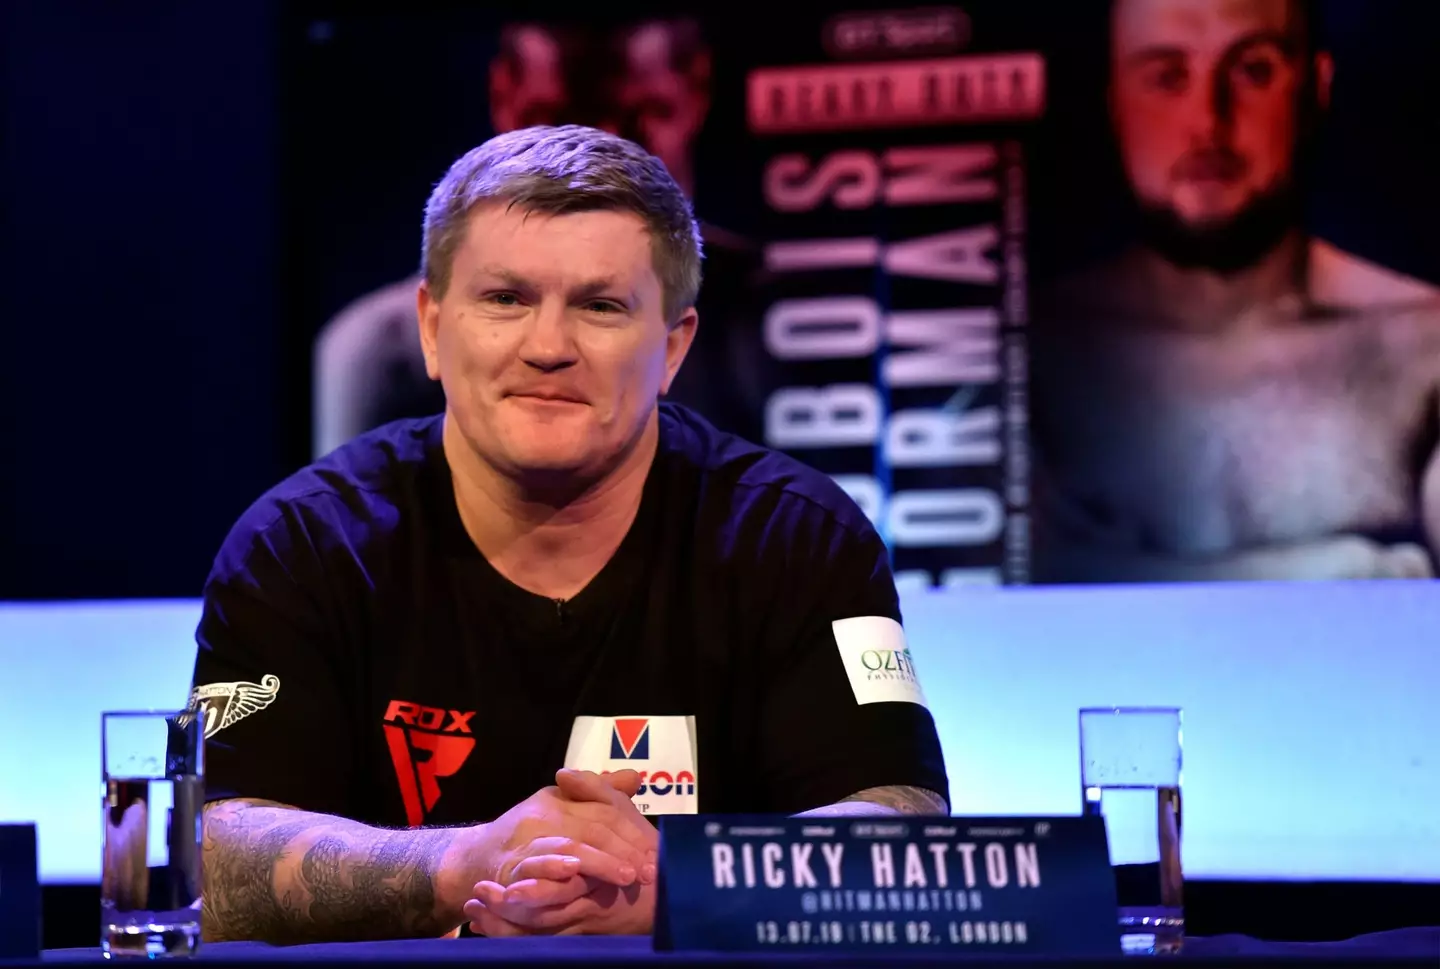 Hatton has been working as a trainer since retirement.